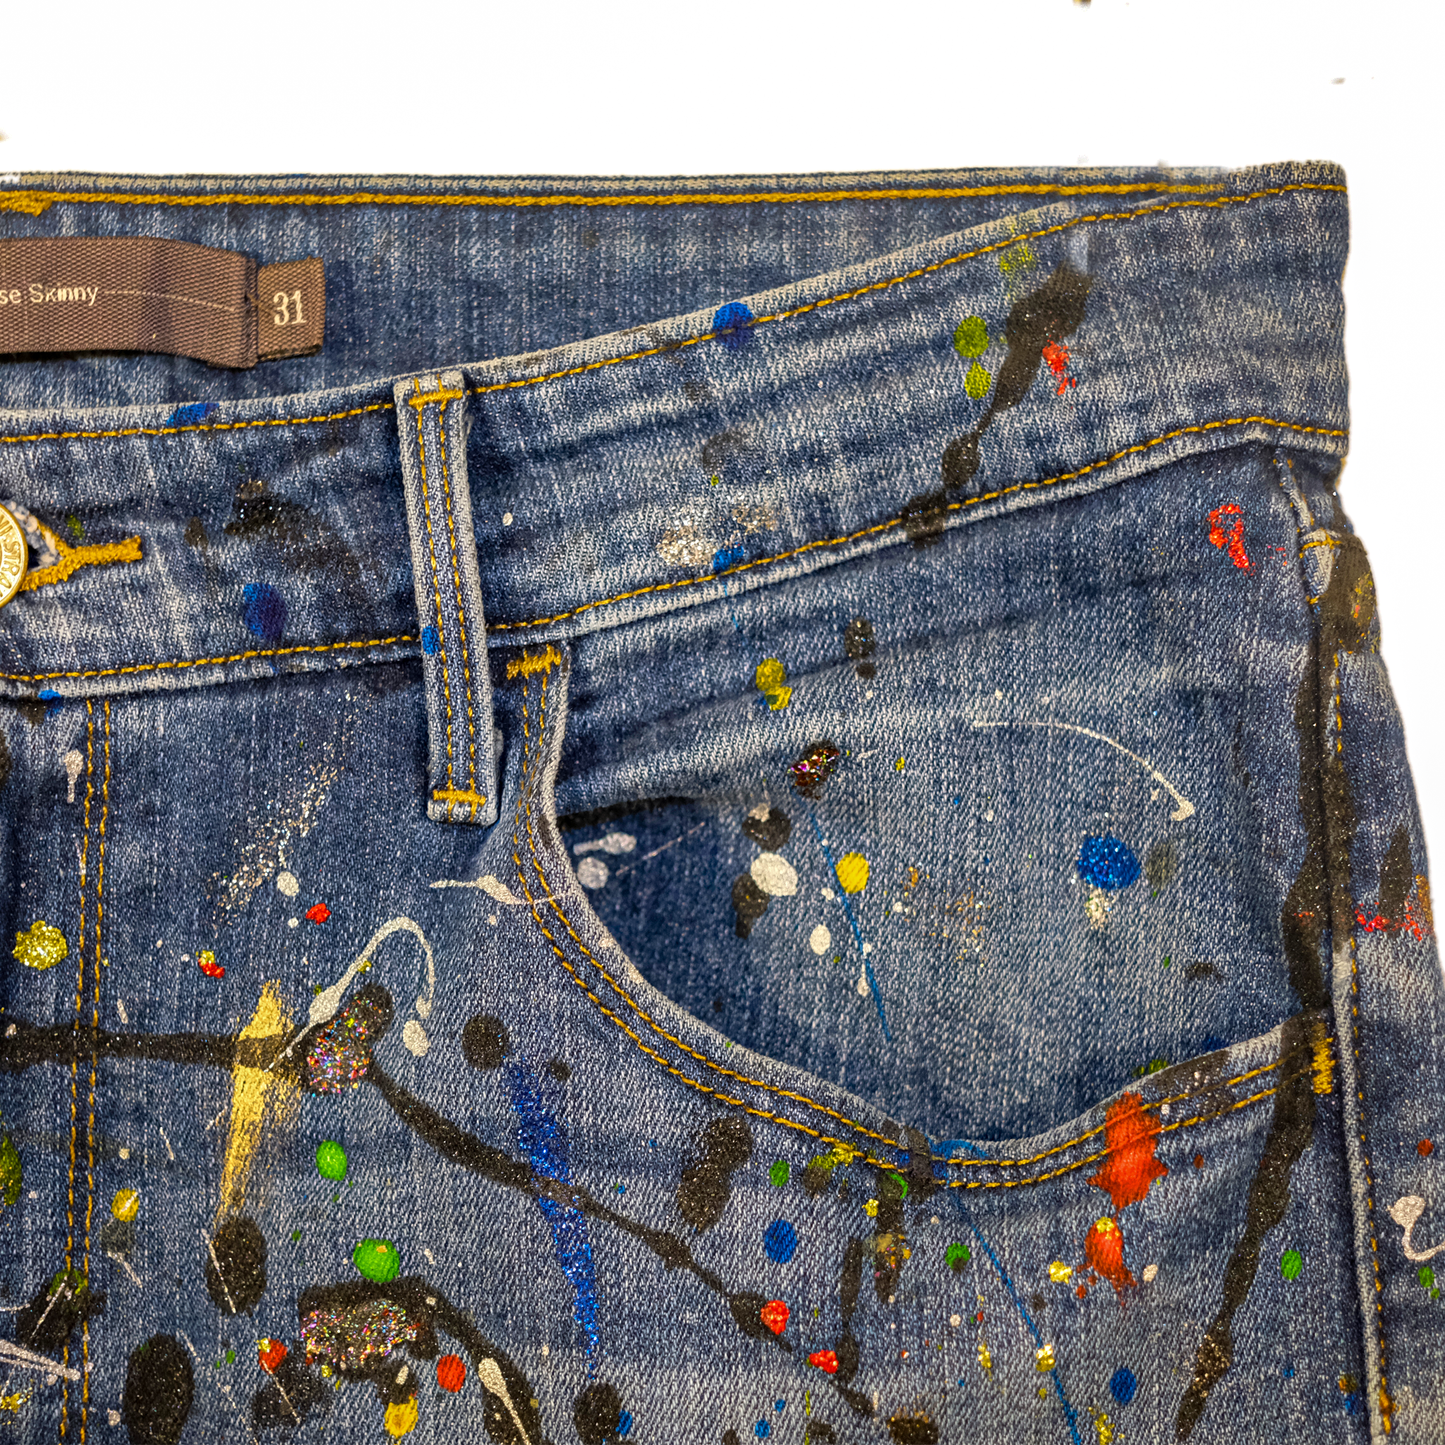 Rainbow Sparkle Up-cycled Cut-off Jean Shorts - Hand-painted by Skye De La Rosa